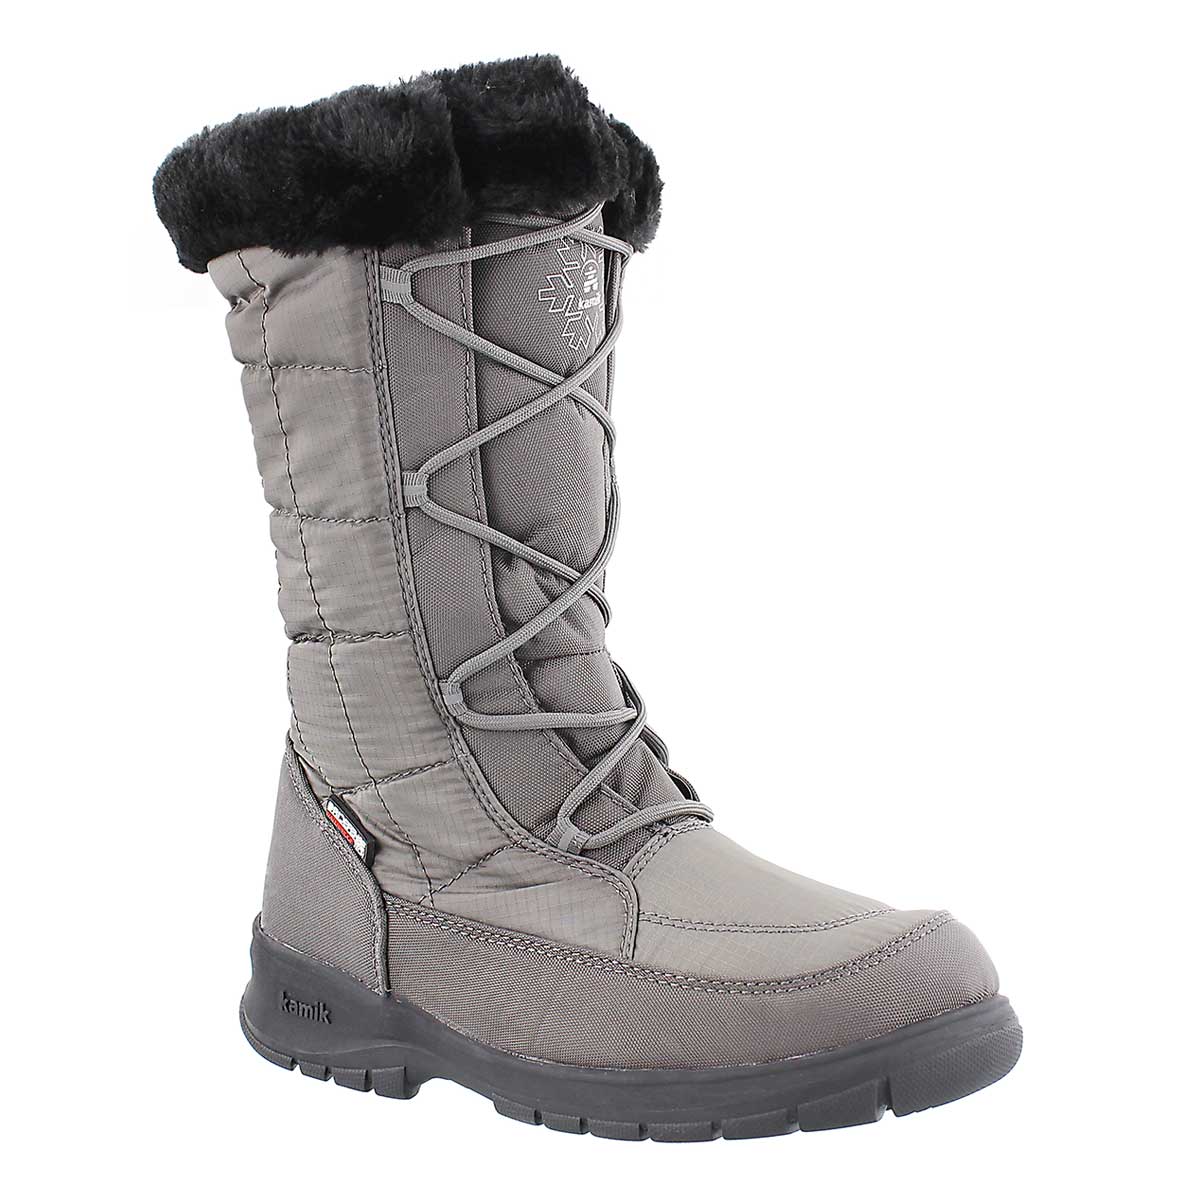 Womens Wide Width Winter Snow Boots | Santa Barbara Institute for ...